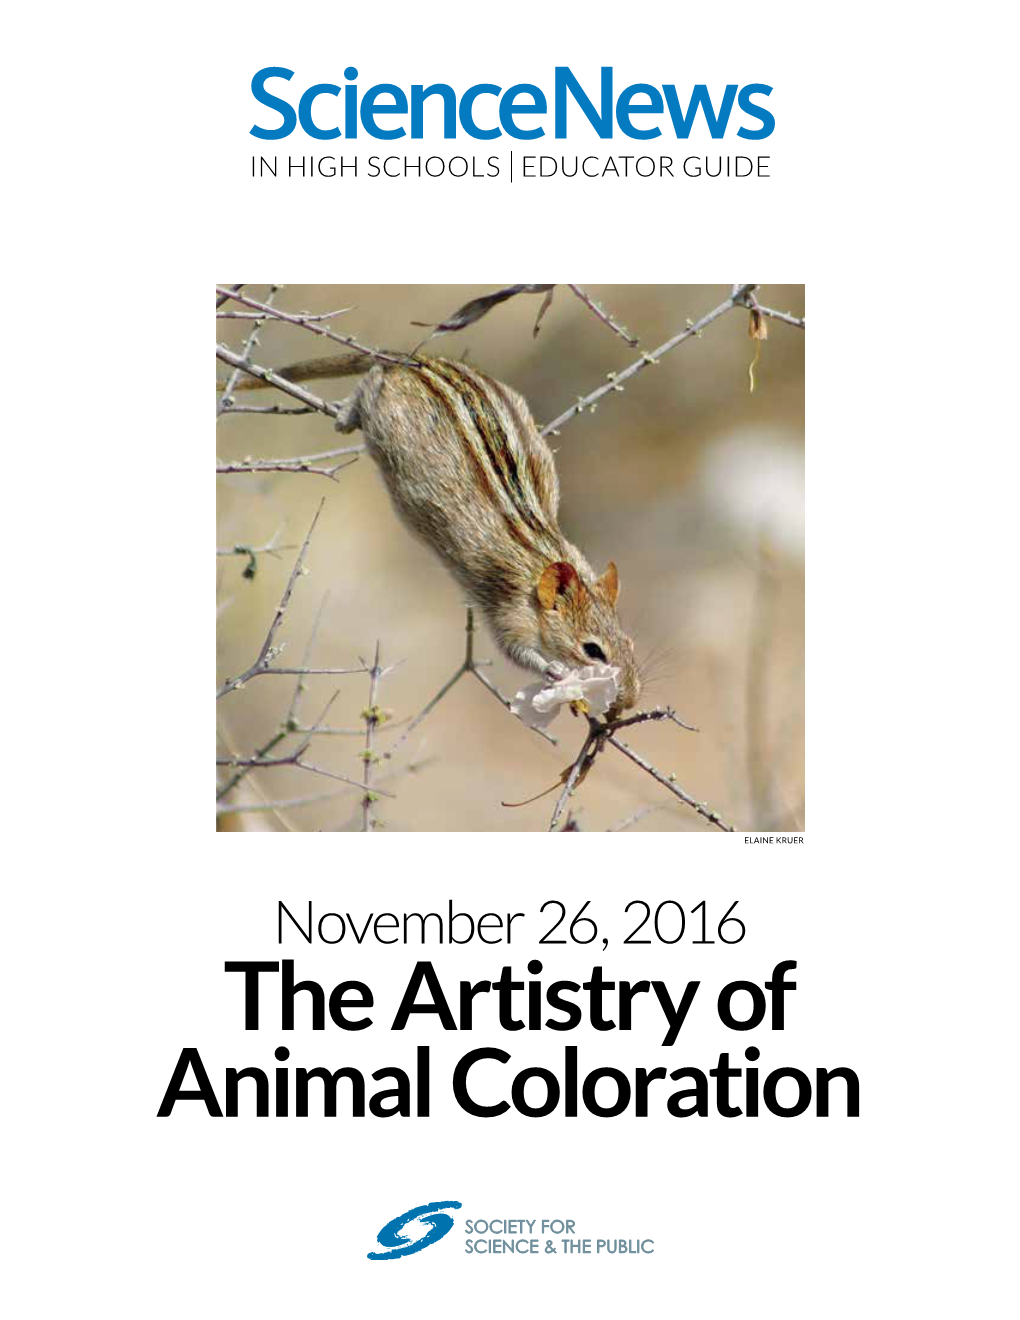 The Artistry of Animal Coloration November 26, 2016